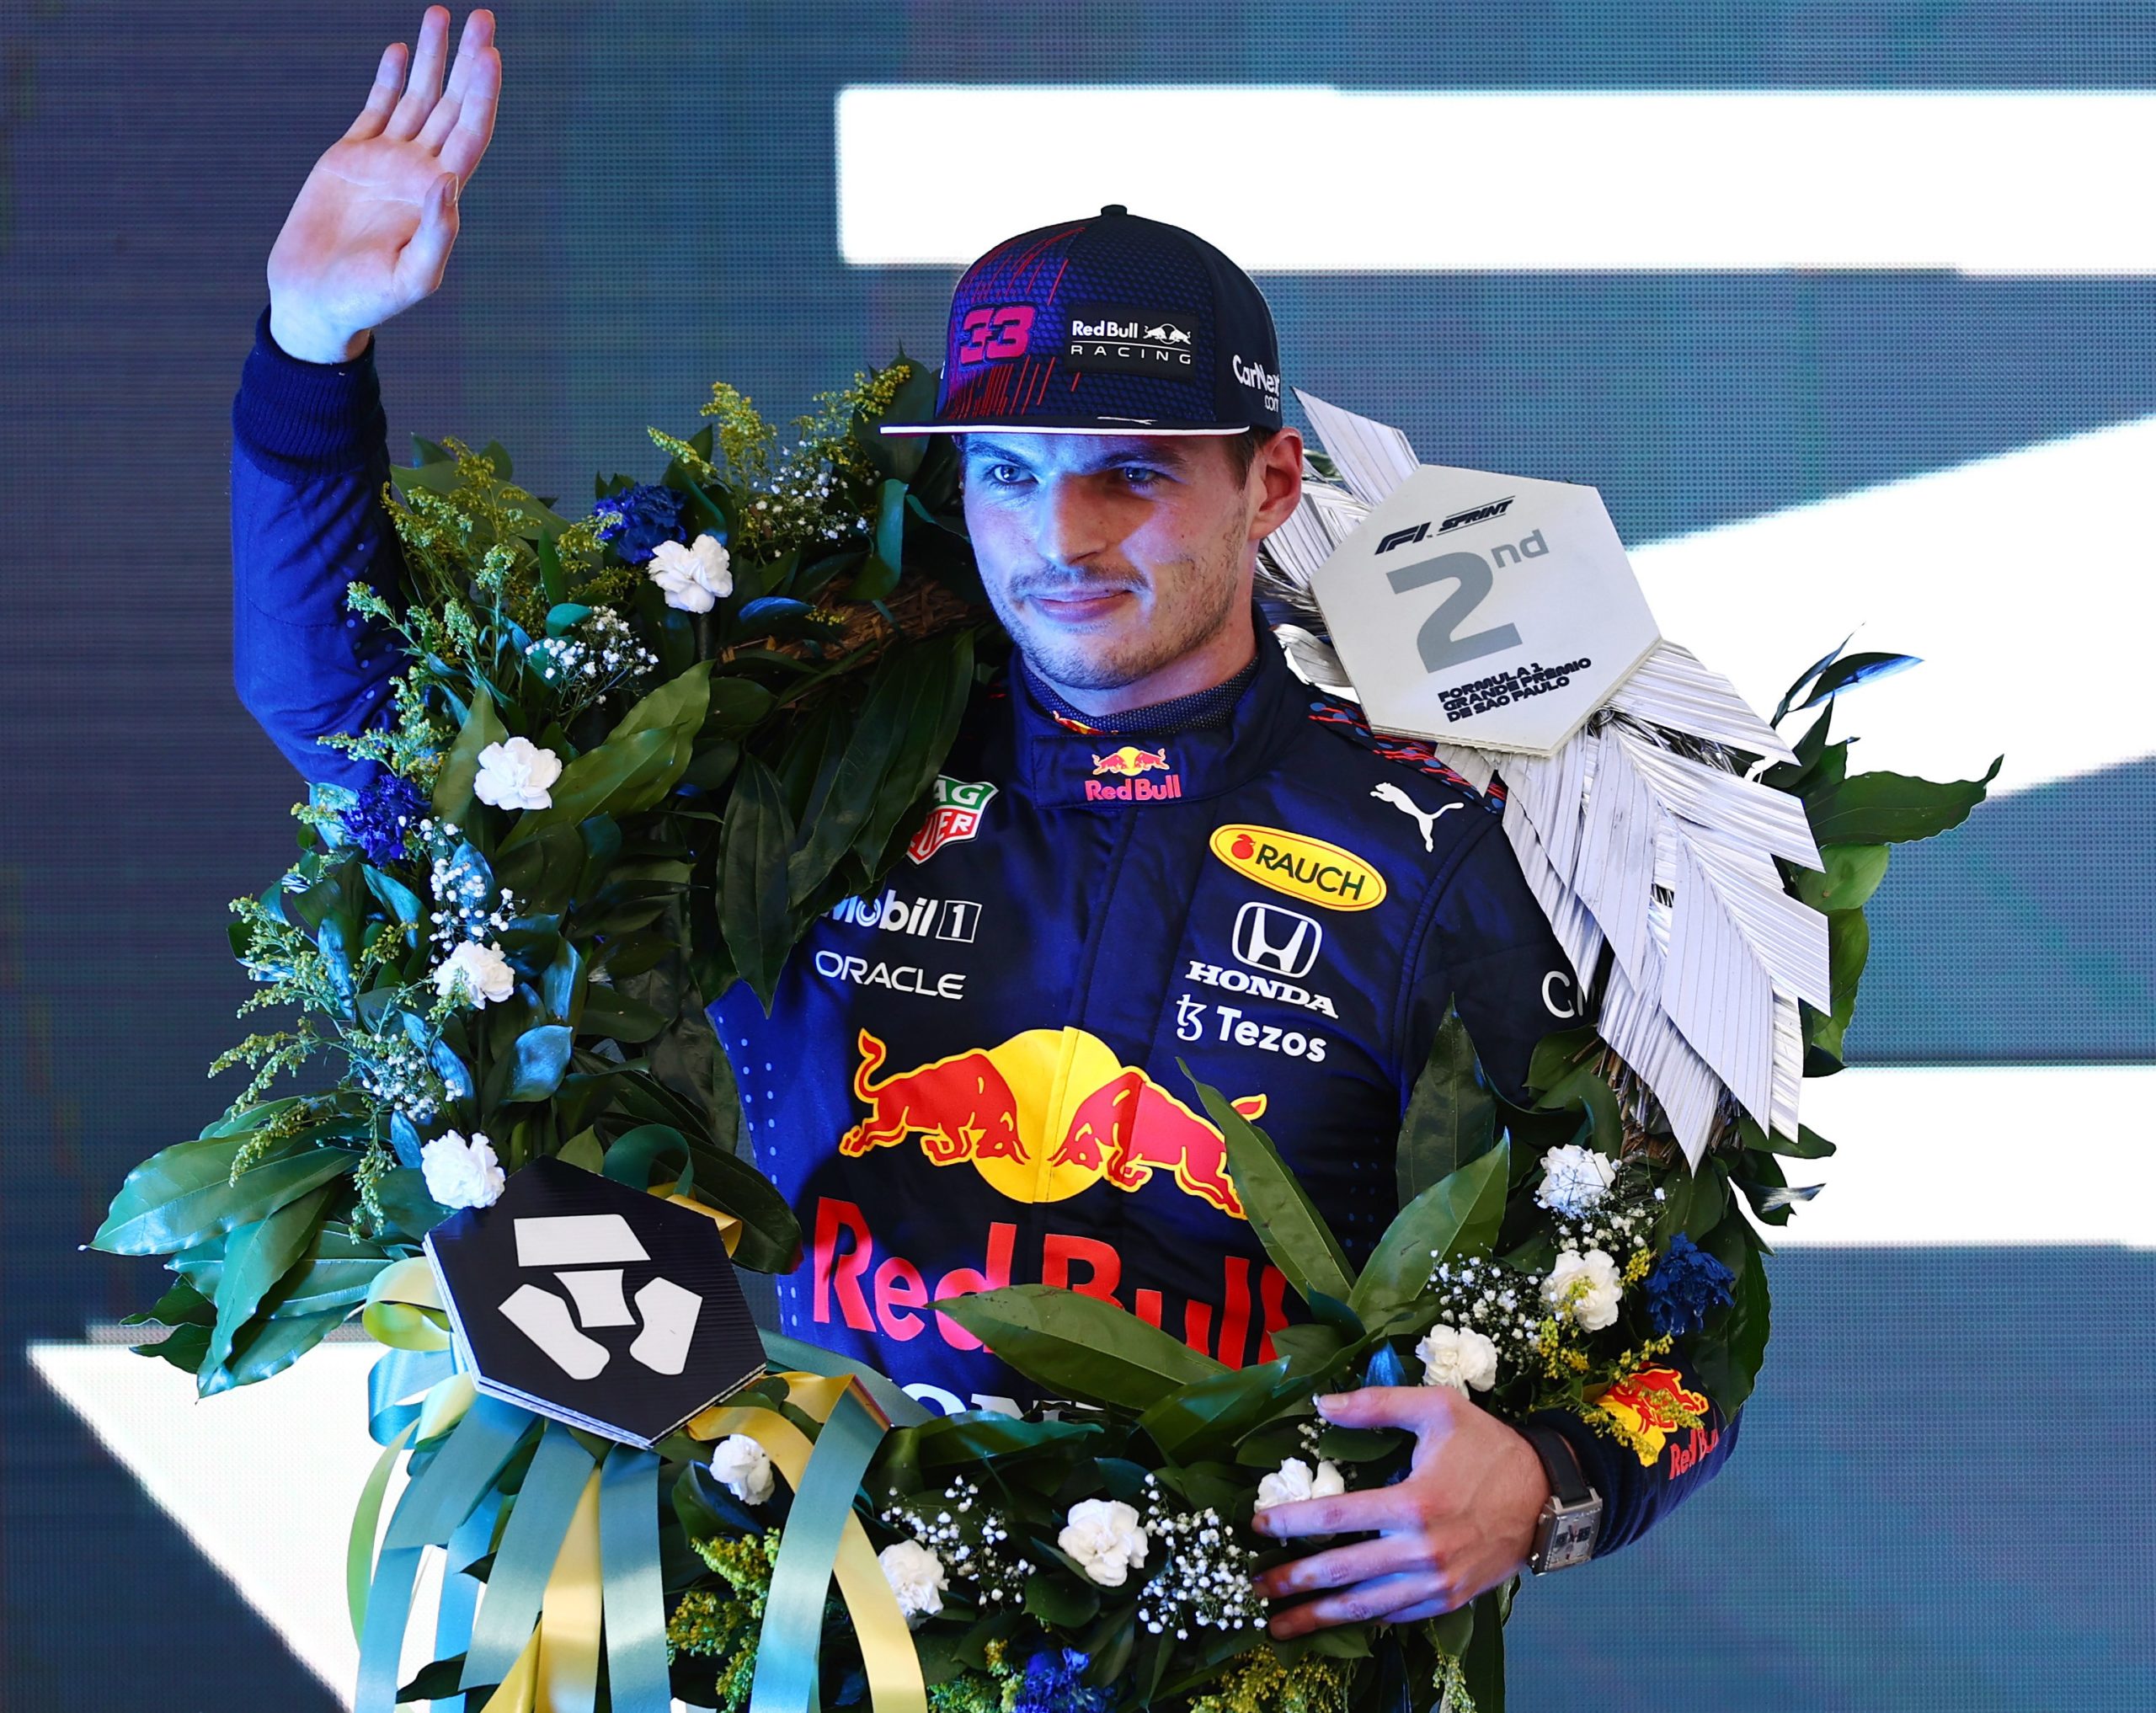 Verstappen tells the stewards to 'have a fine dinner and expensive wine' after €50,000 fine